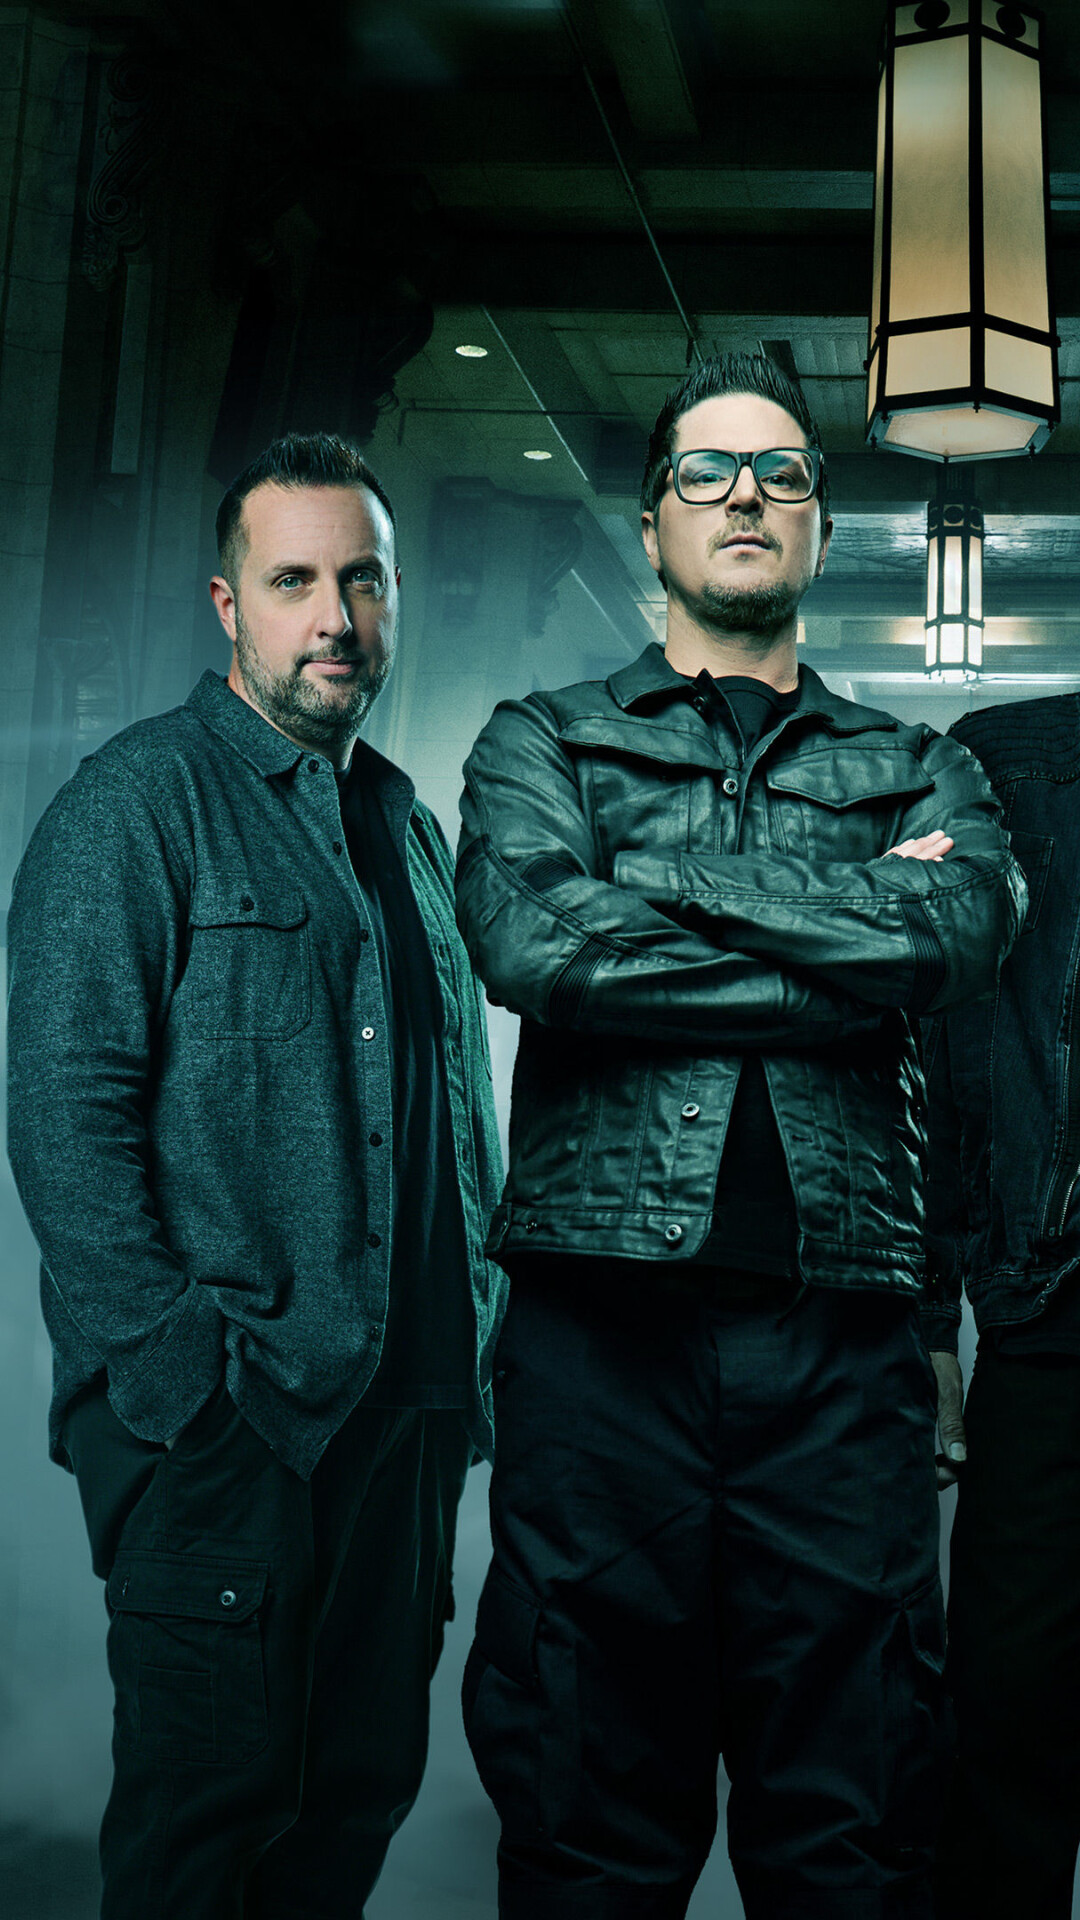 Ghost Adventures (TV Series): Billy Tolley and Zak Bagans investigate the infamous Cecil Hotel in Los Angeles. 1080x1920 Full HD Background.